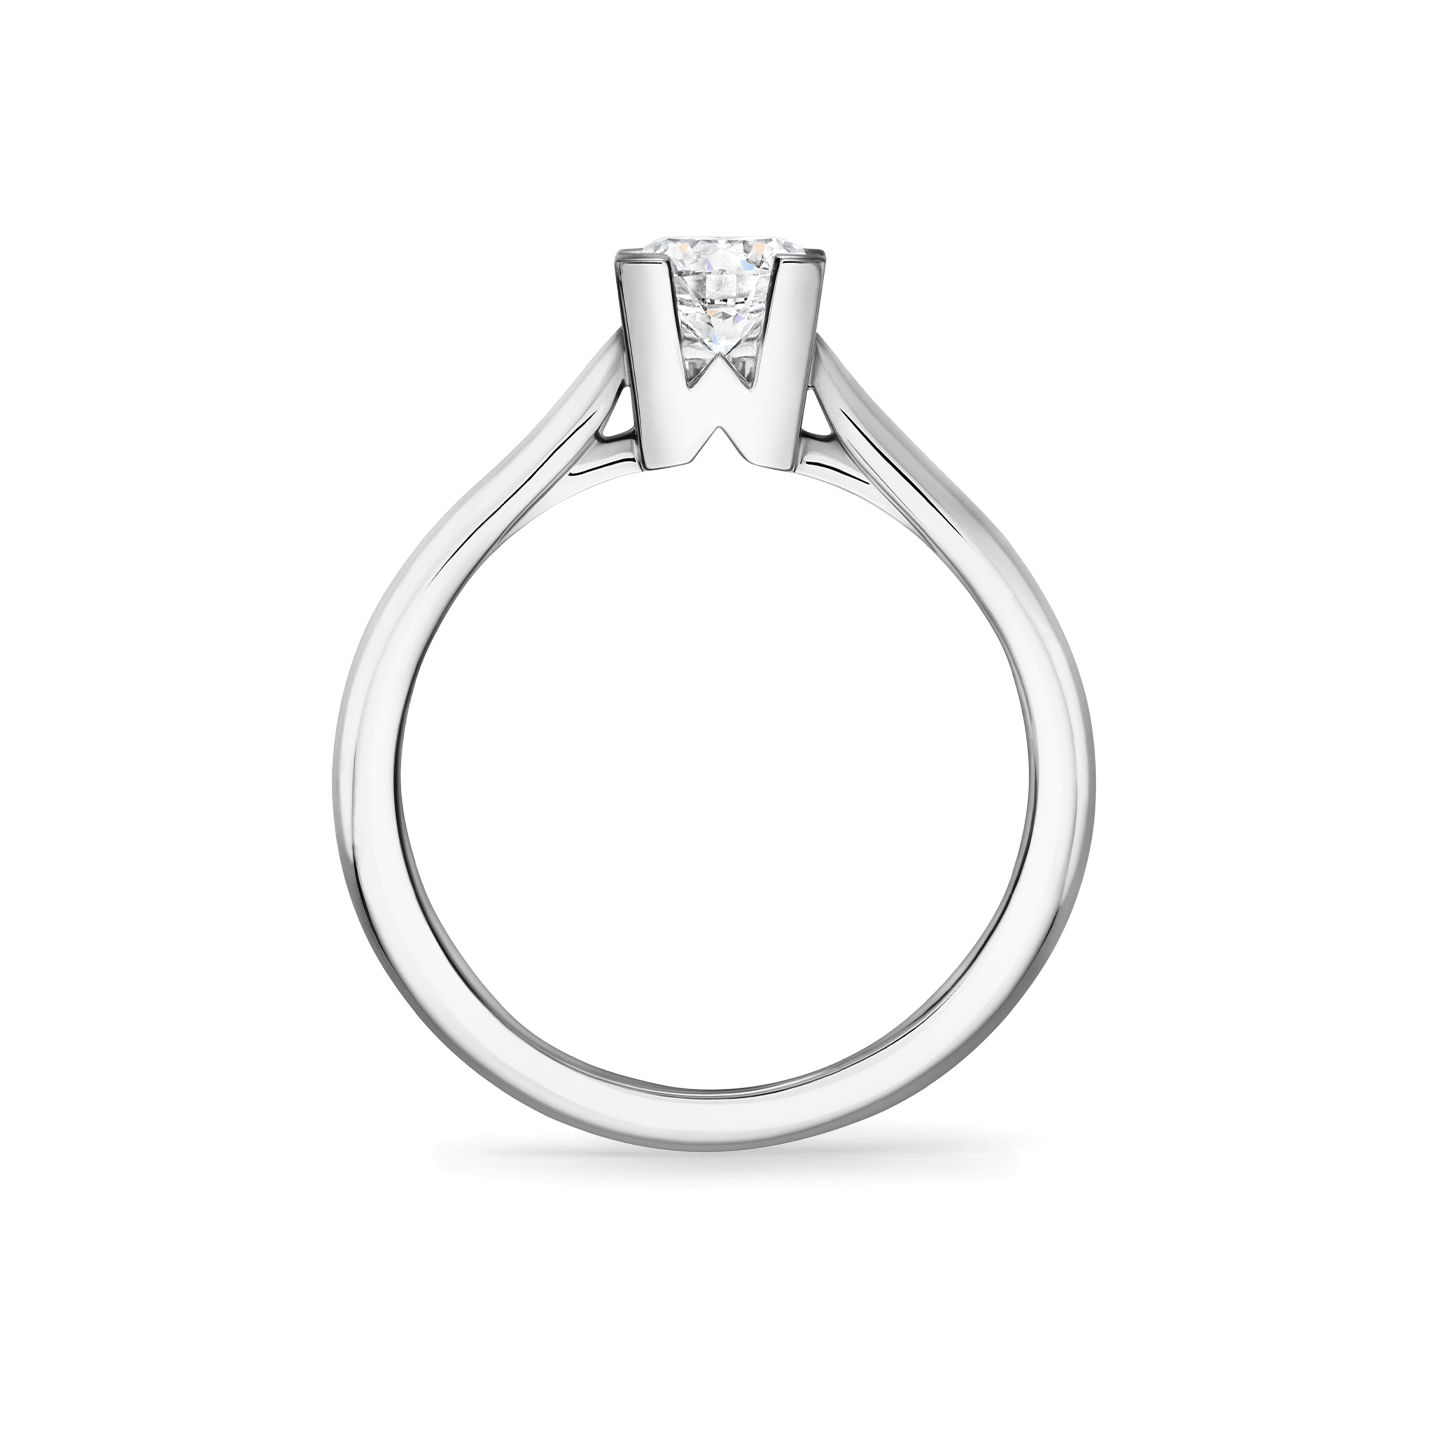 Alternative side view of the HW Logo Round Brilliant Diamond Engagement Ring